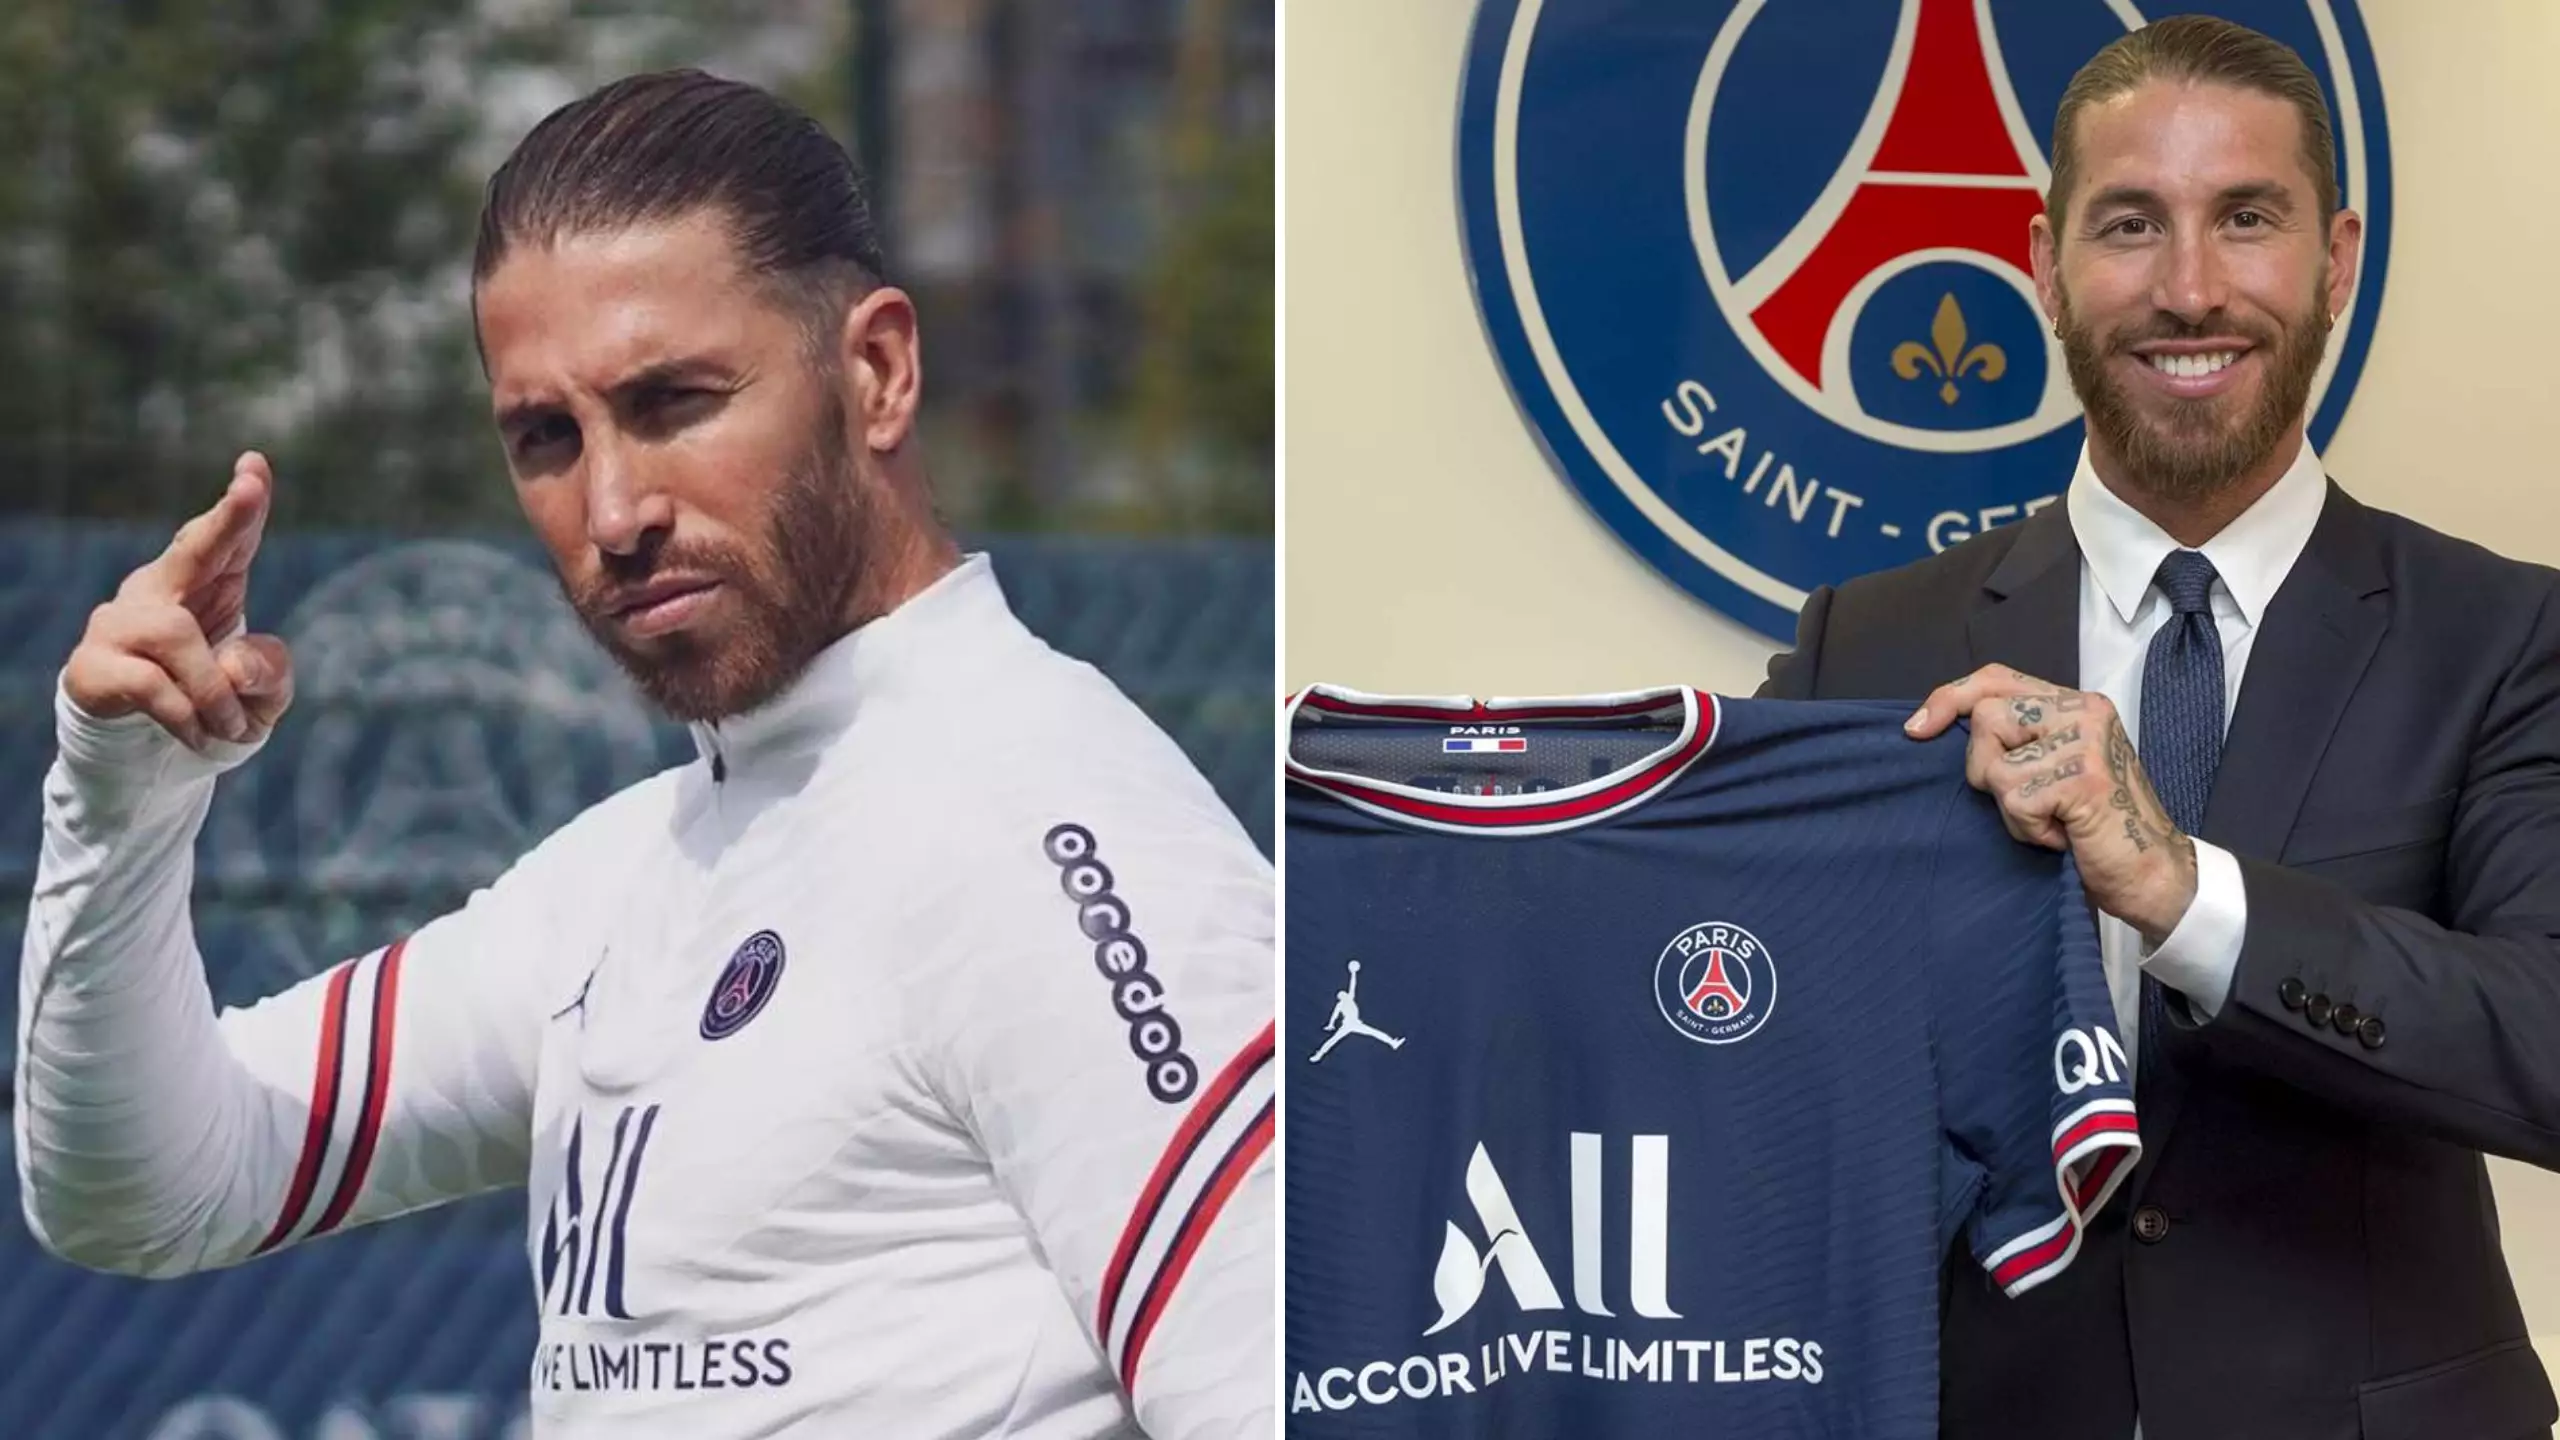 Sergio Ramos' PSG Contract Could Be Terminated, Sensationally Claims French Media